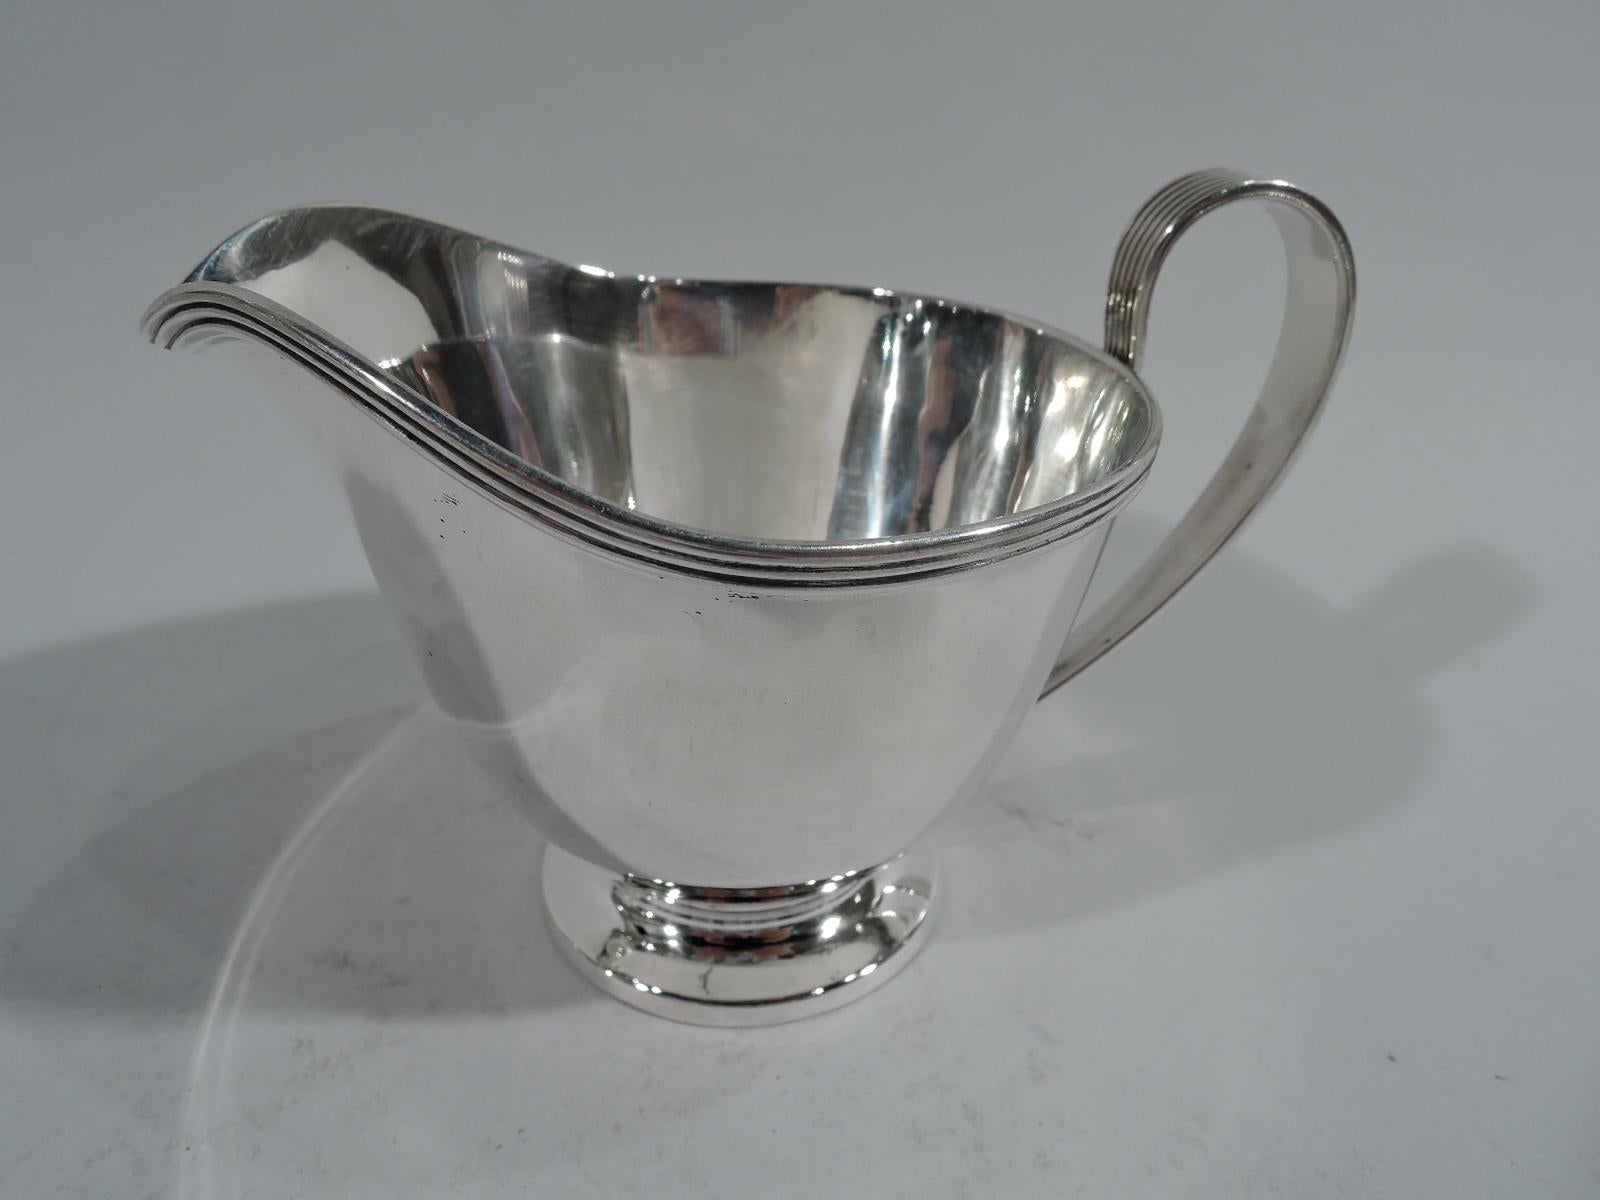 Stylish sterling silver creamer and sugar. Made by Tiffany & Co. in New York. Each: Round on raised foot. Creamer has soft lip spout and high-looping handle. Sugar has c-scroll swing handle. Handles tapering and reeded as are rims. Hallmarks include